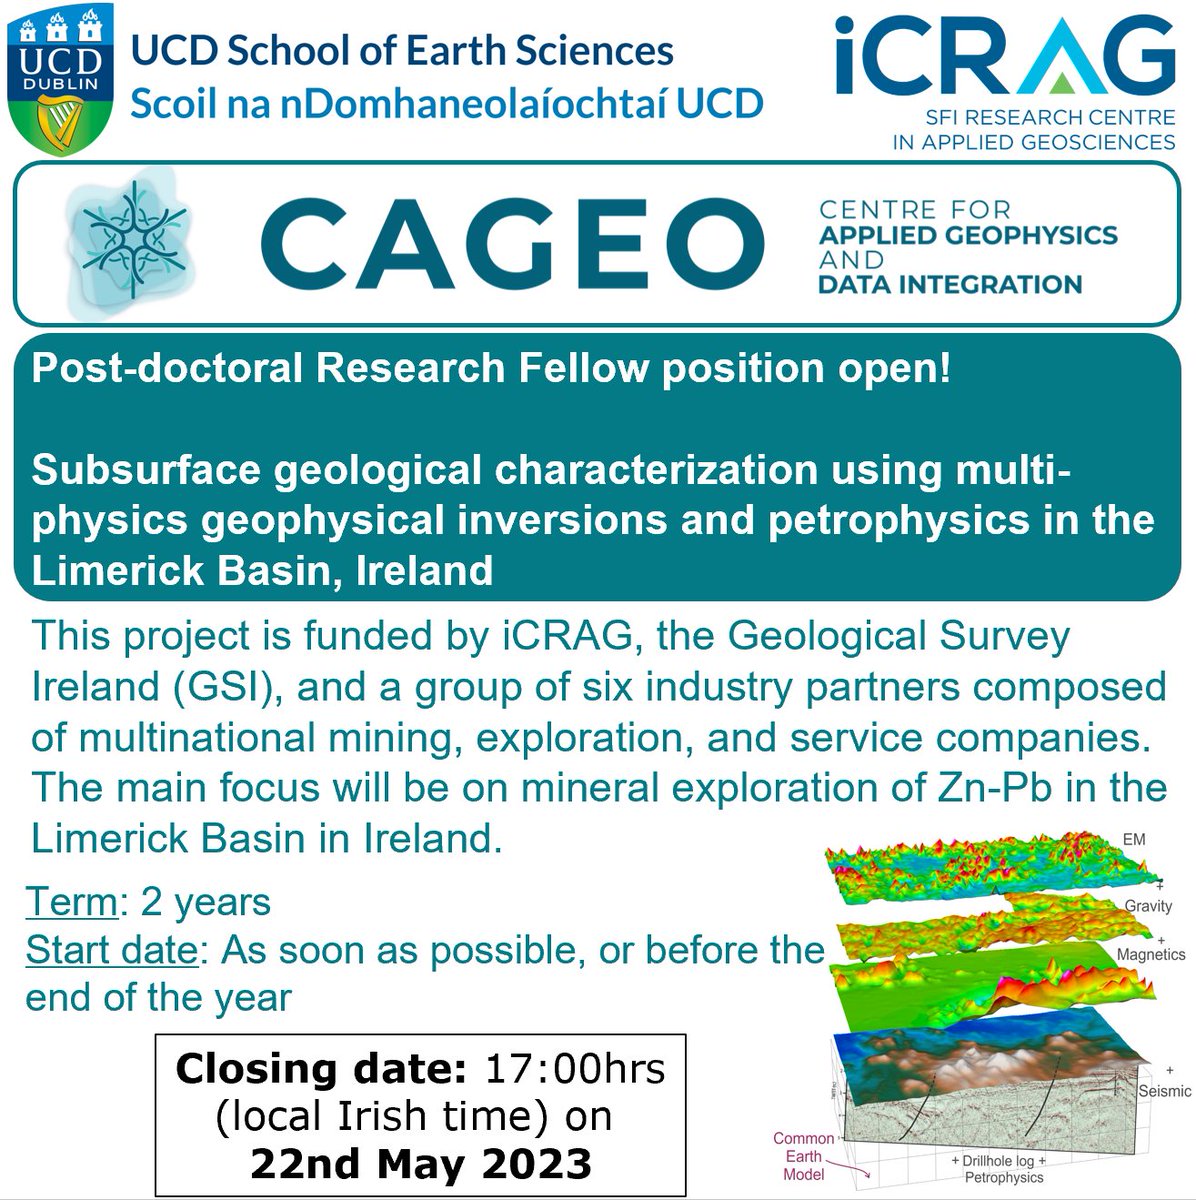 Job alert! 📣 Post-doctoral position open! Apply here: my.corehr.com/pls/ucdrecruit… Search by Reference Number  015824 Closing date: 17:00hrs (local Irish time) on 22nd May 2023 @iCRAGcentre @UCD_Earth_Sci #postdoc #Science #geophysics